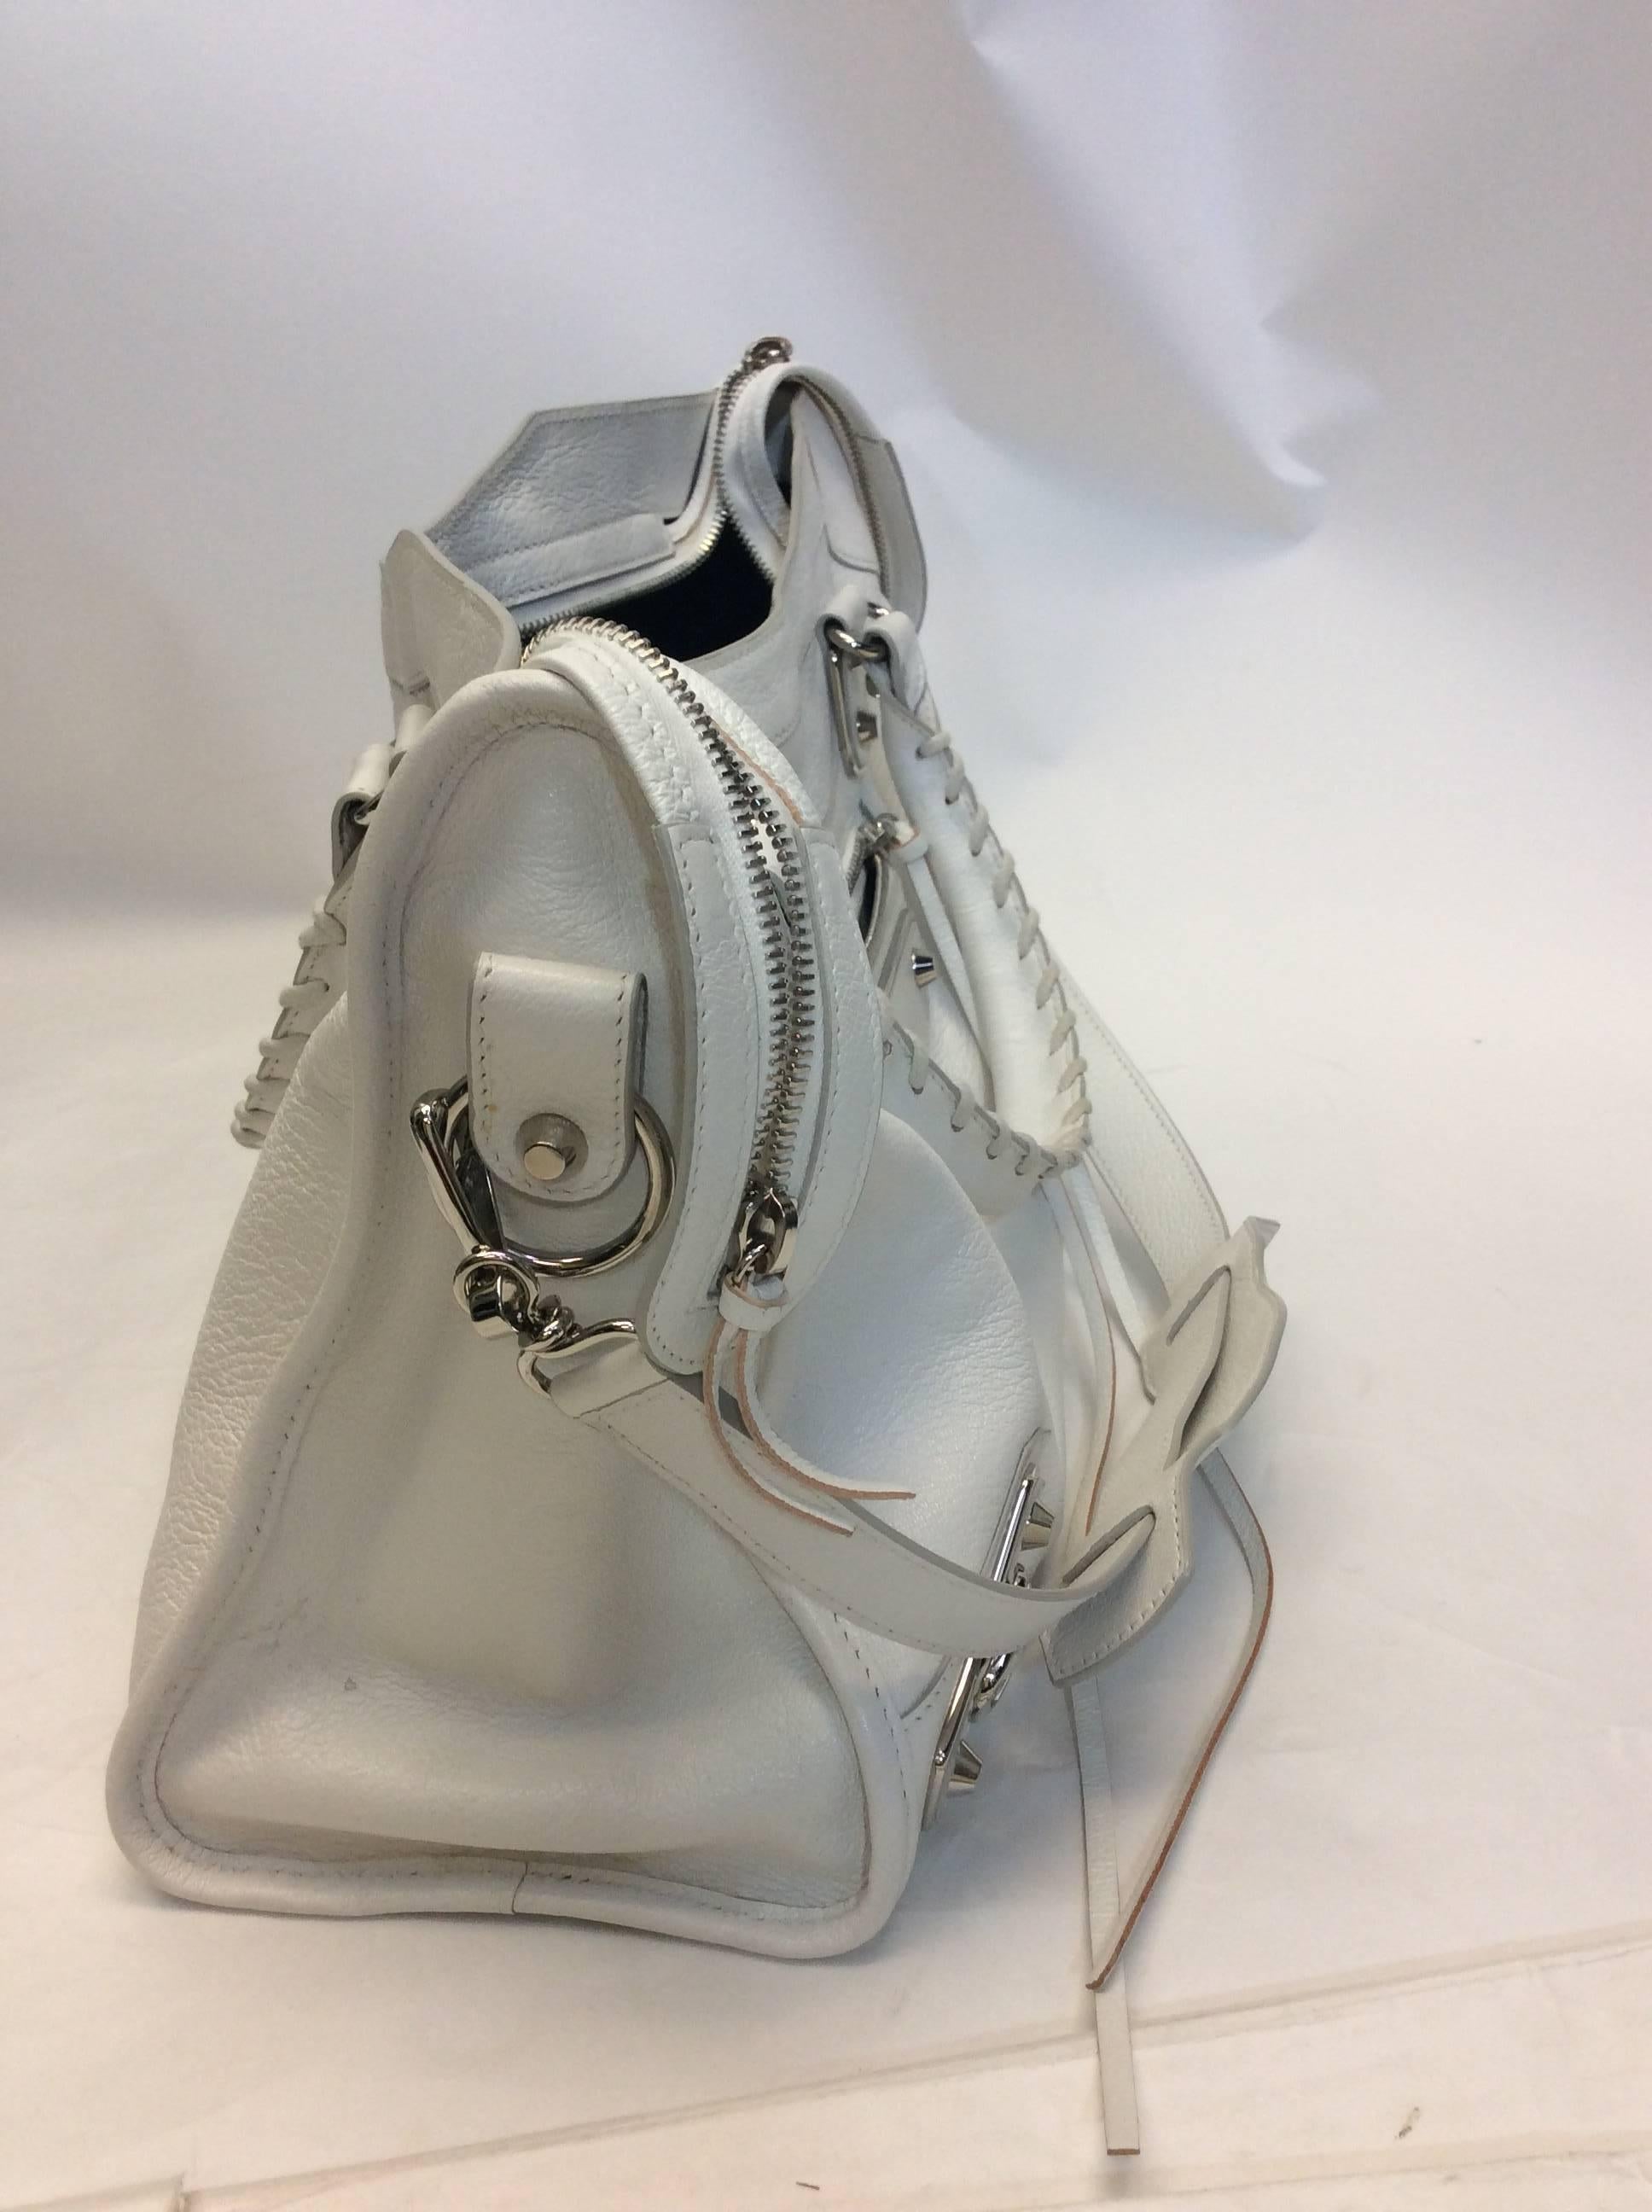 Balenciaga White City Bag NWT 
NWT, $2125
Our price: $799
Crossbody option included
Silver hardware, comes with mirror
Very small stain on the exterior side - see photo